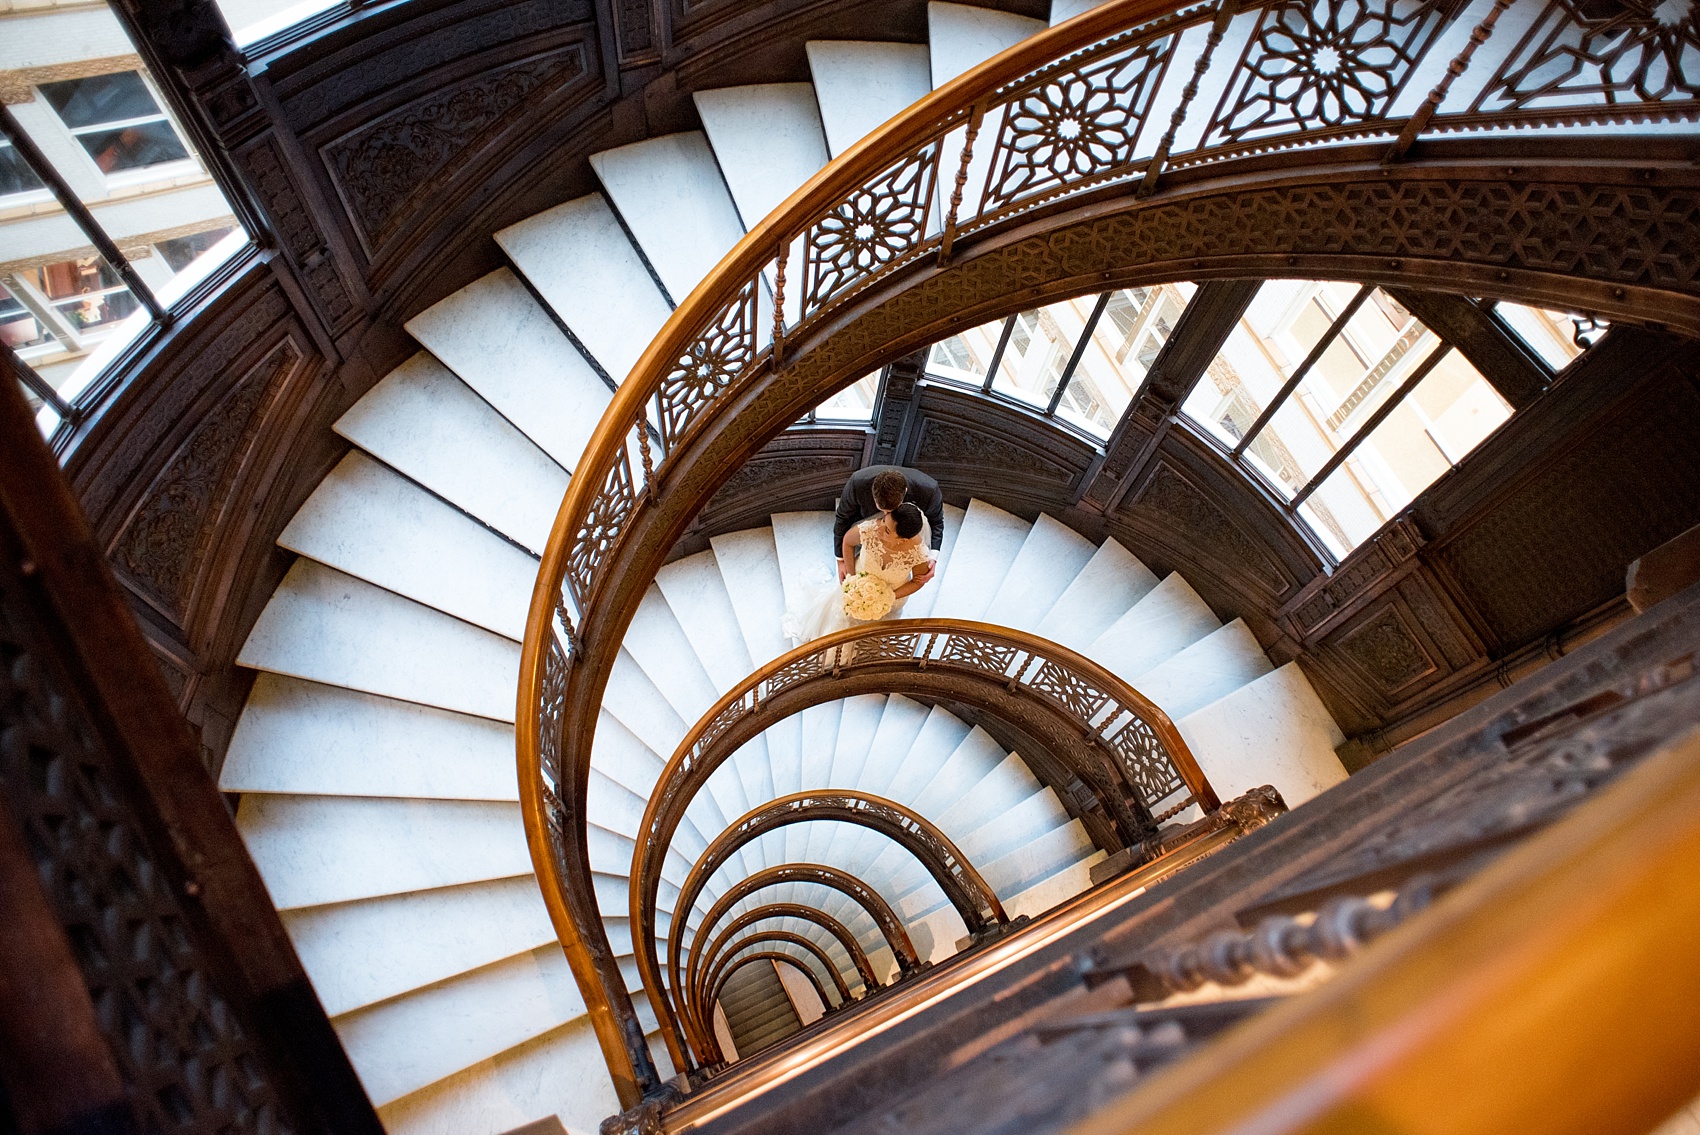 Mikkel Paige Photography photos of a wedding in downtown Chicago. An image of the bride and groom on the spiral stairs of The Rookery.